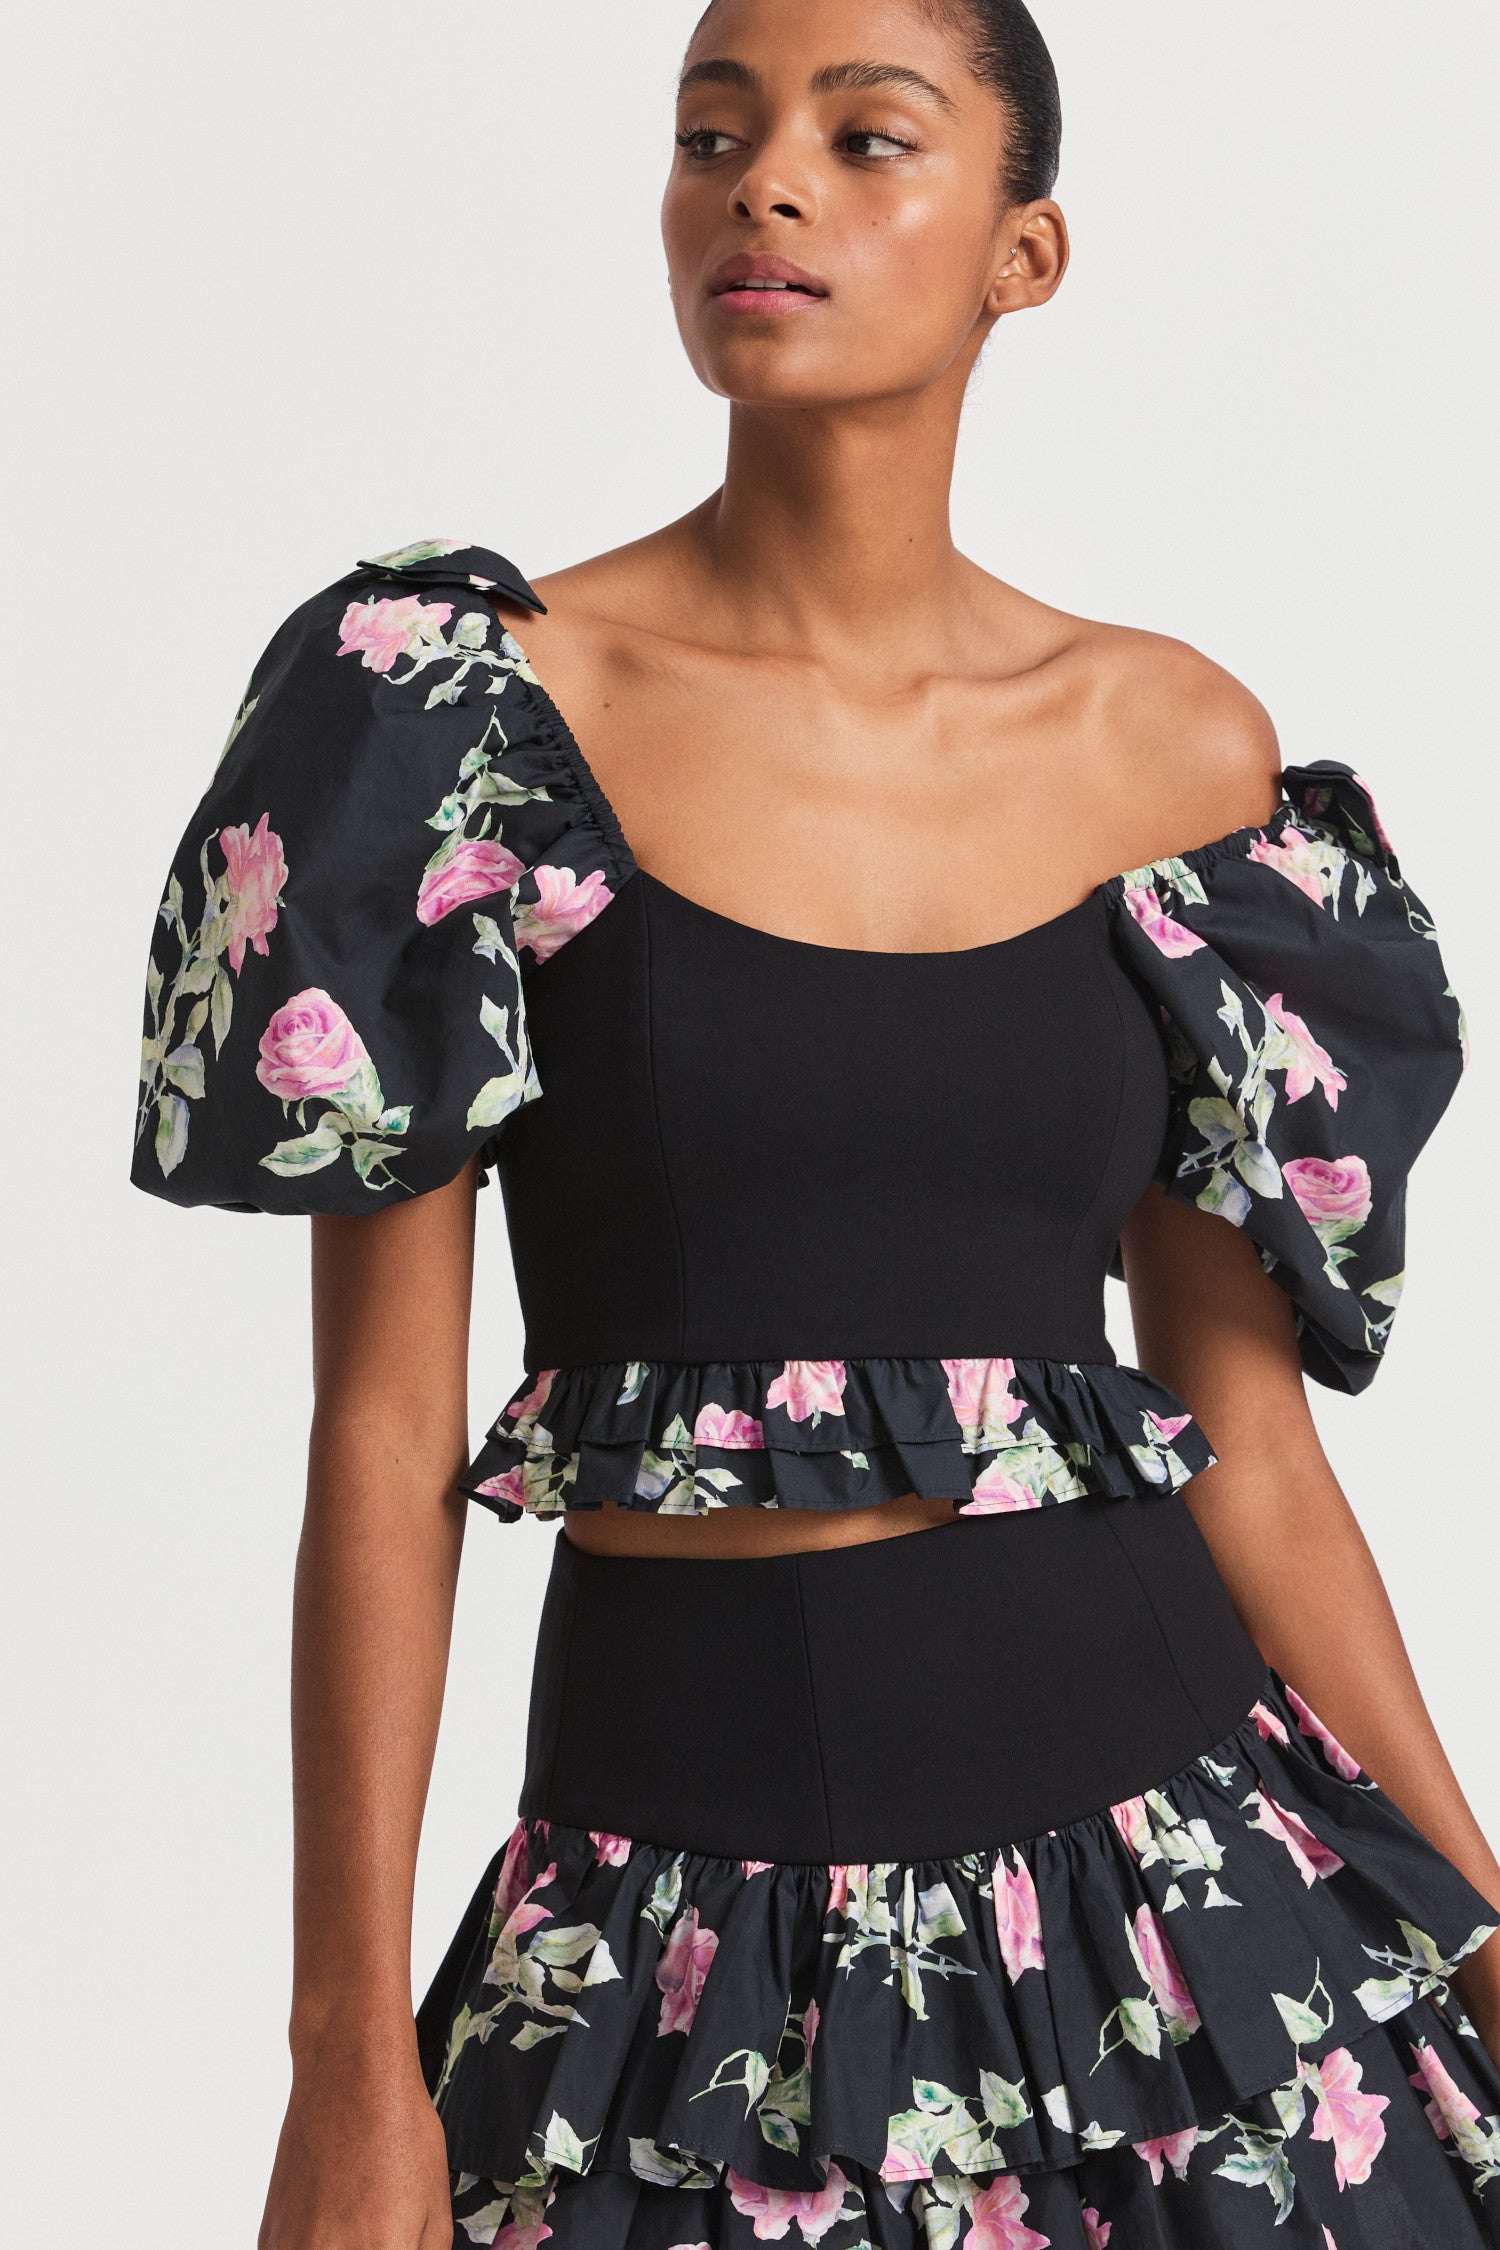 Black floral crop top with puff sleeves, a stretchy bodice and ruffle peplum detailing lines the hem of the top.